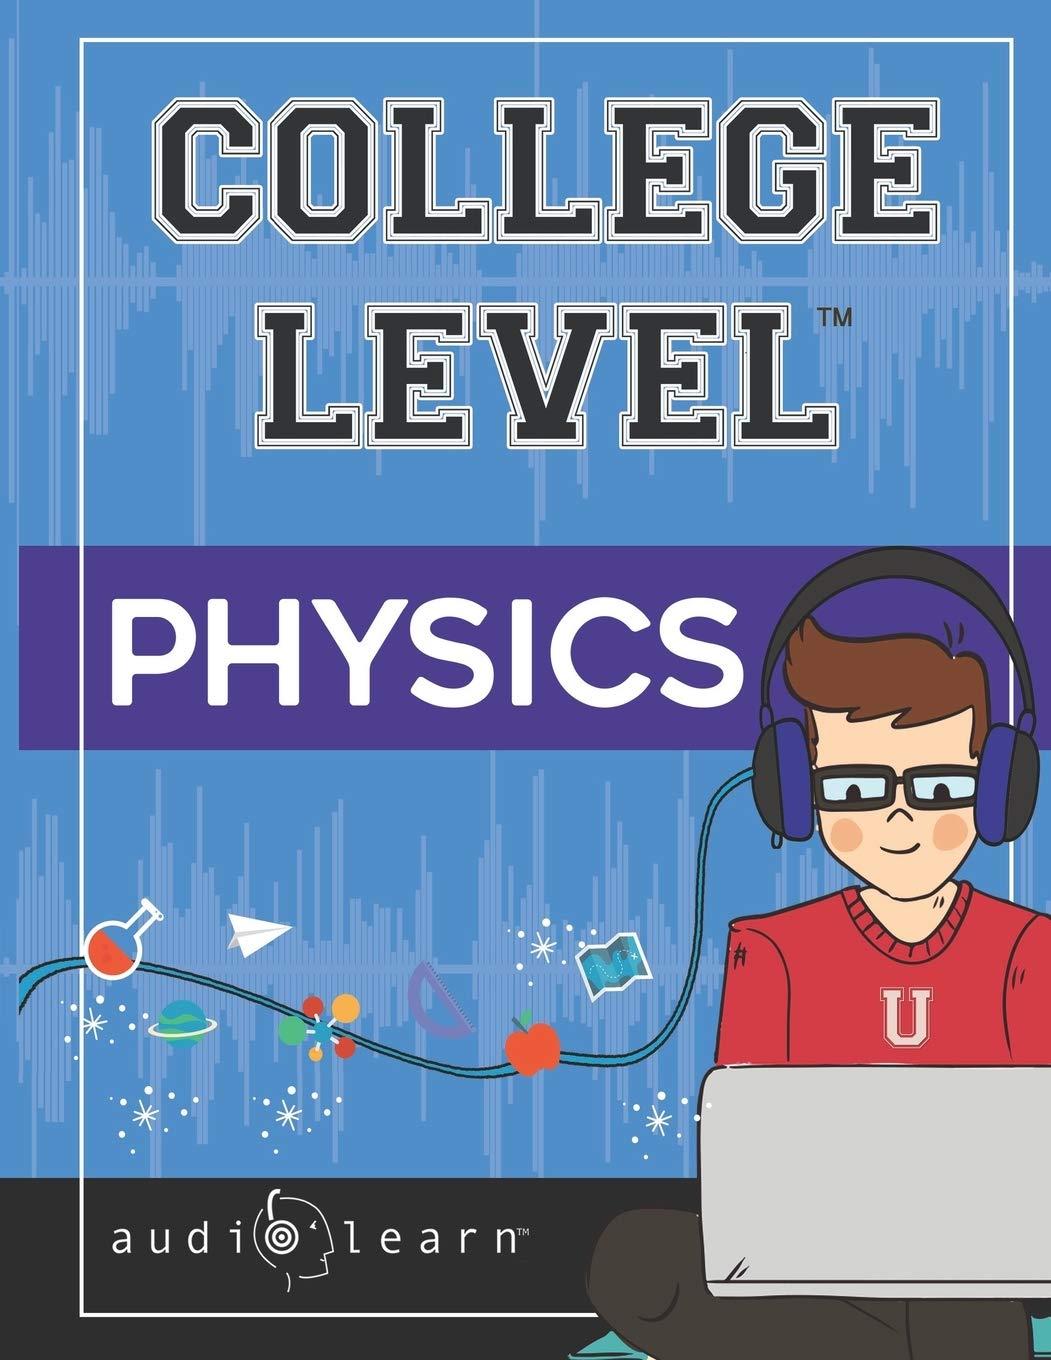 college level physics 1st edition audiolearn content team b084dh56sr, 979-8607054816